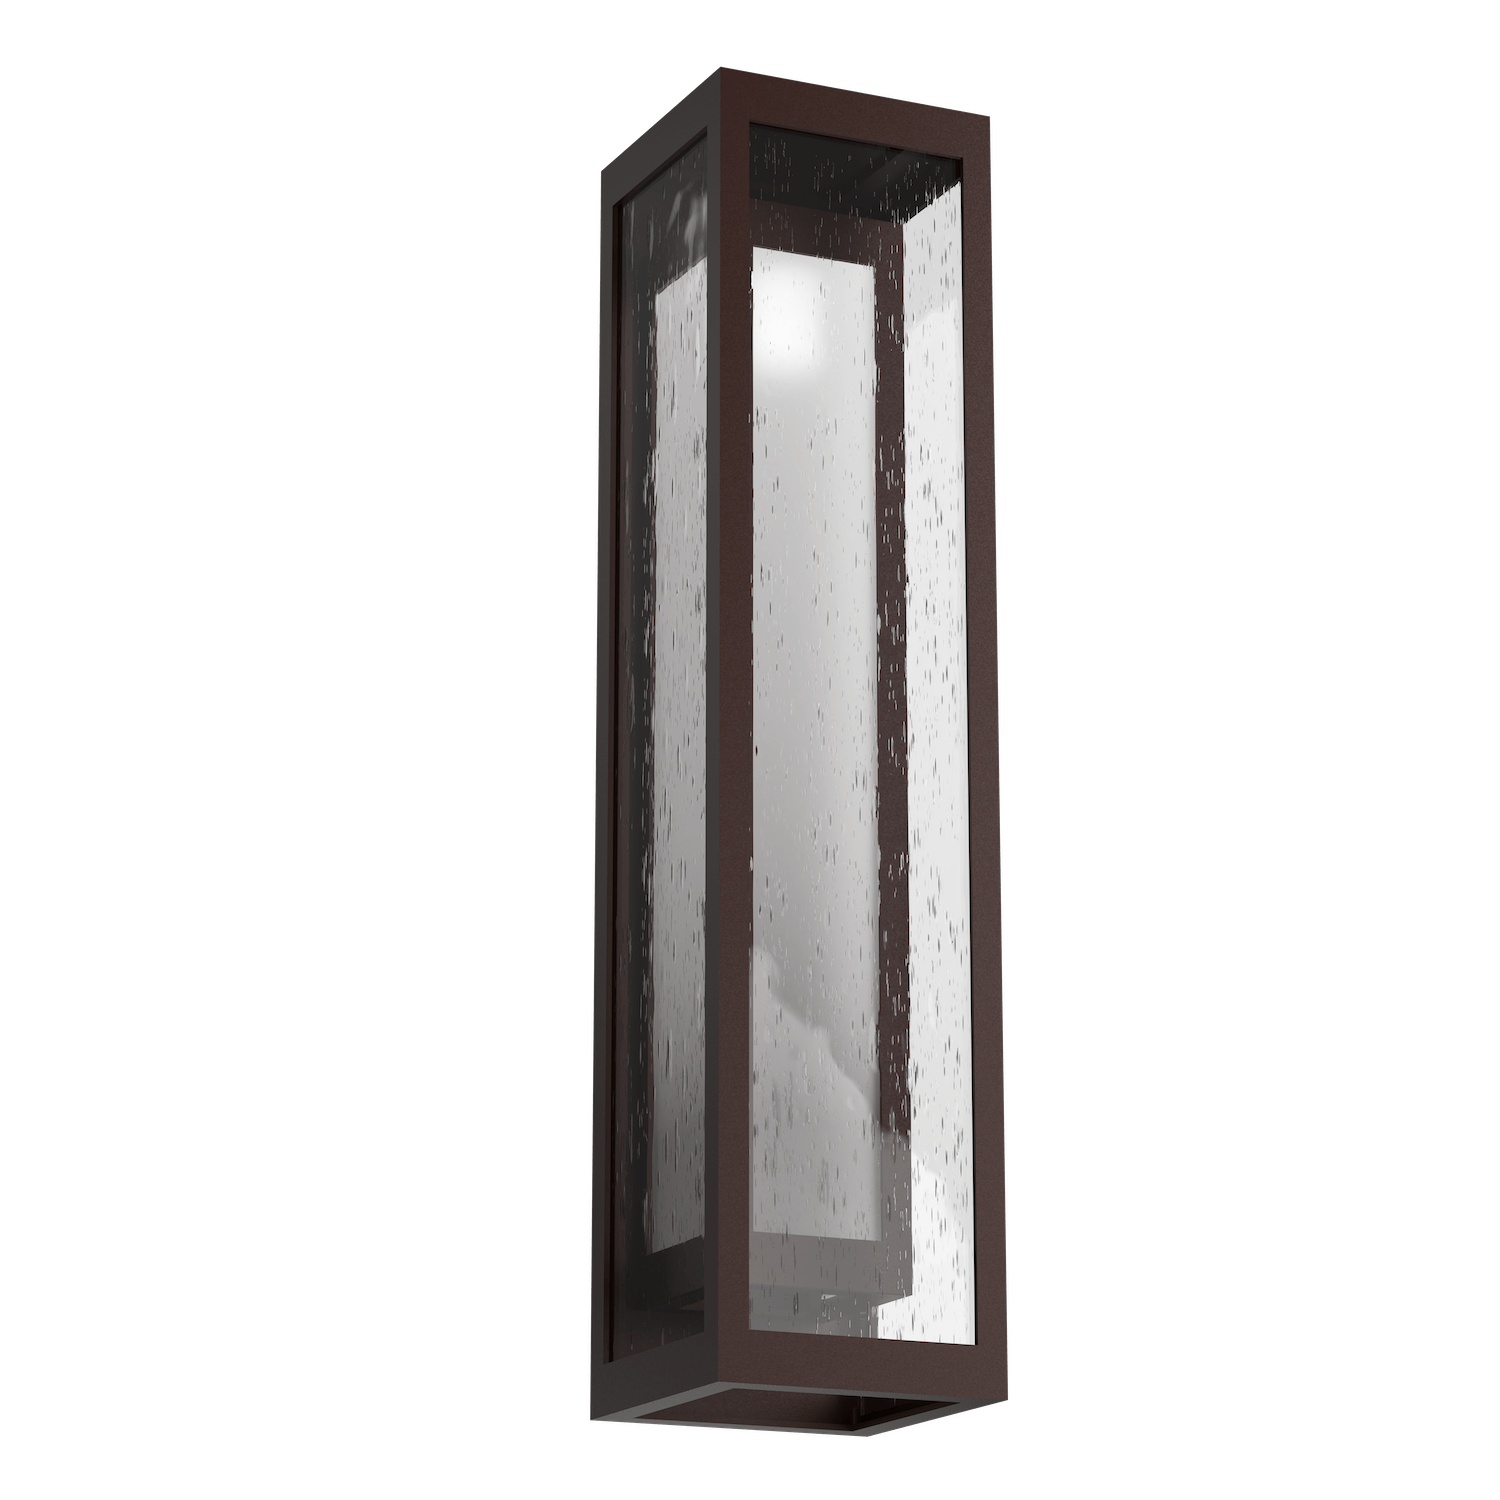 ODB0027-26-SB-F-Hammerton-Studio-Double-Box-26-inch-outdoor-sconce-with-statuary-bronze-finish-and-frosted-glass-shade-and-LED-lamping